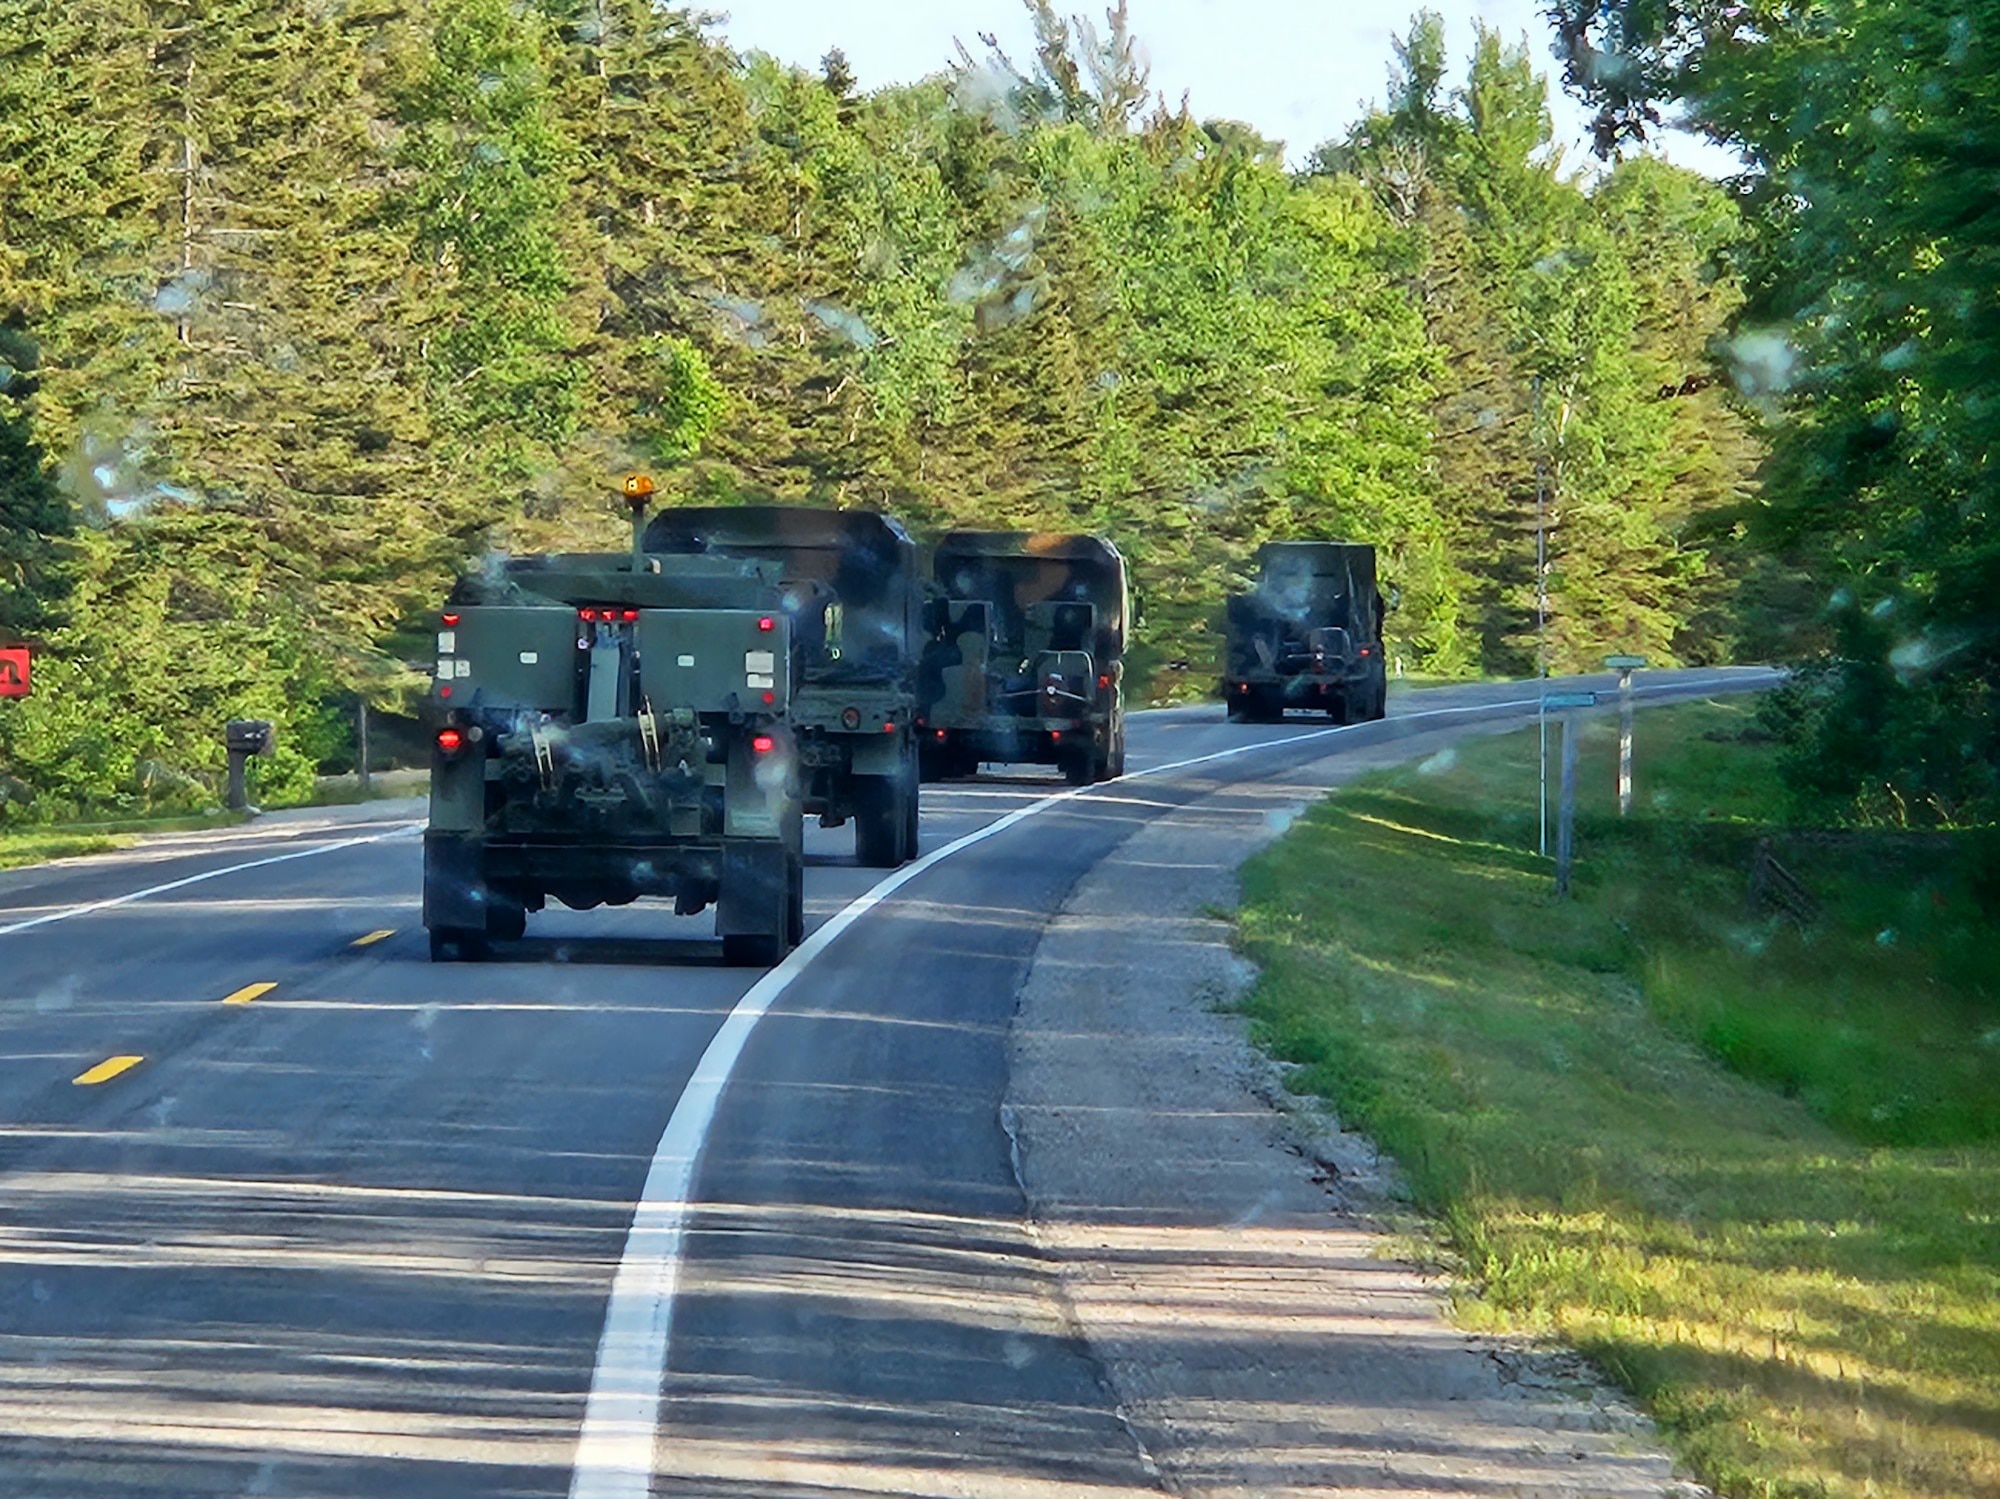 Members of the 128th Air Control Squadron of the Wisconsin Air National Guard achieved a training first by convoying more than 500 miles from Volk Field, Wis., to Alpena Combat Readiness Training Center, Mich., July 8, 2023, to train on new forward operating location tactics and equipment. This two-week training improved unit readiness.